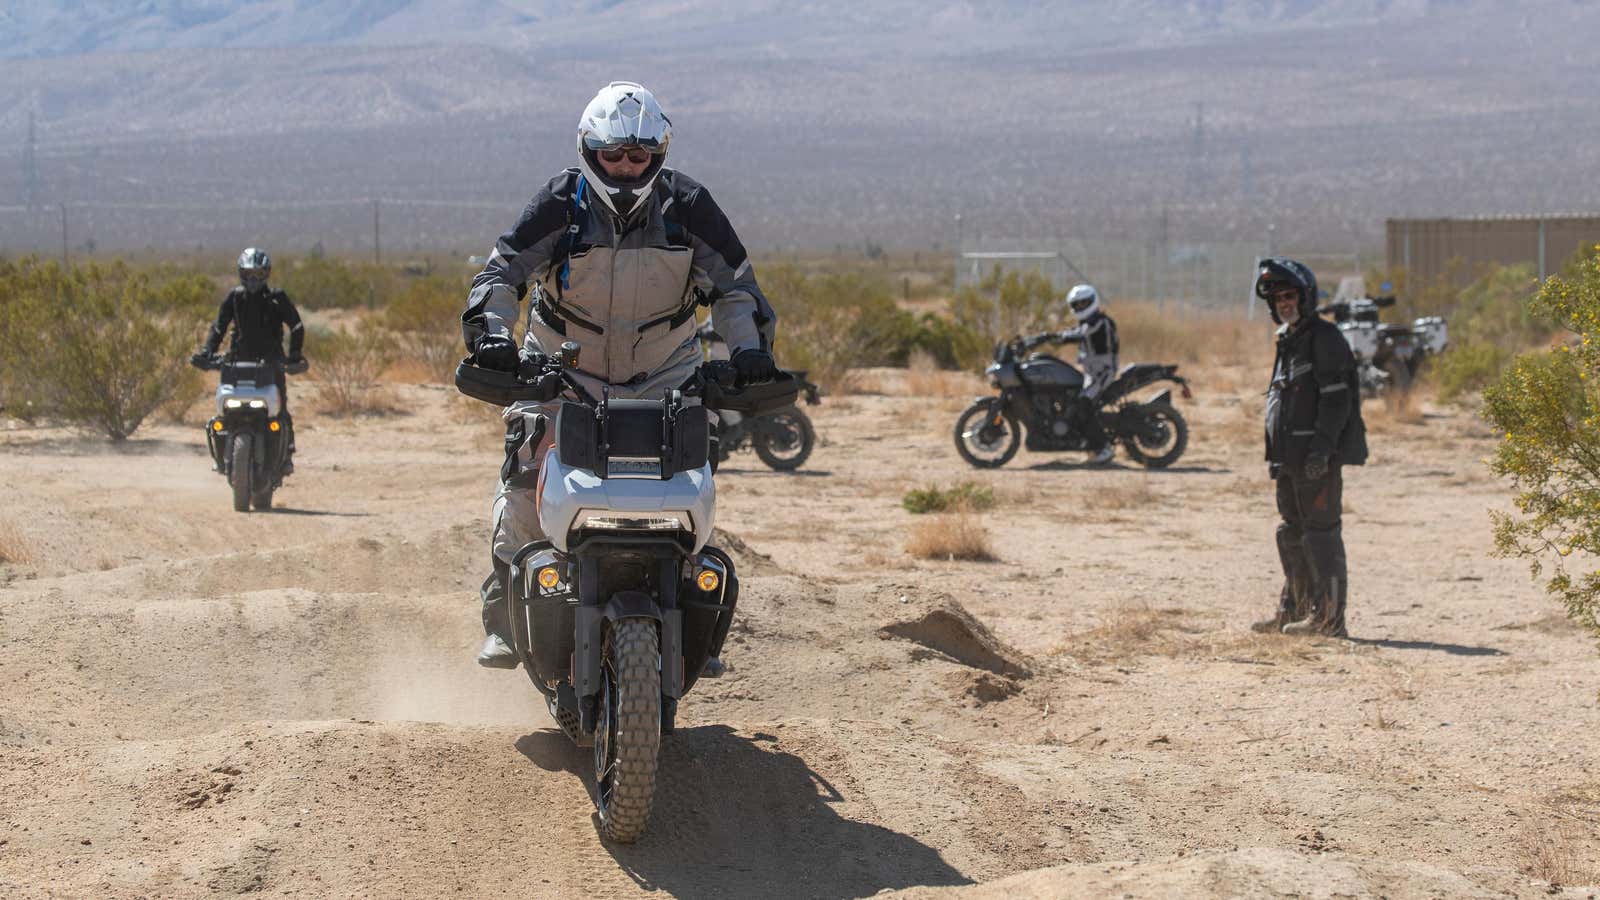 An Old Dog Learns New Tricks At An Off-Road Riding School